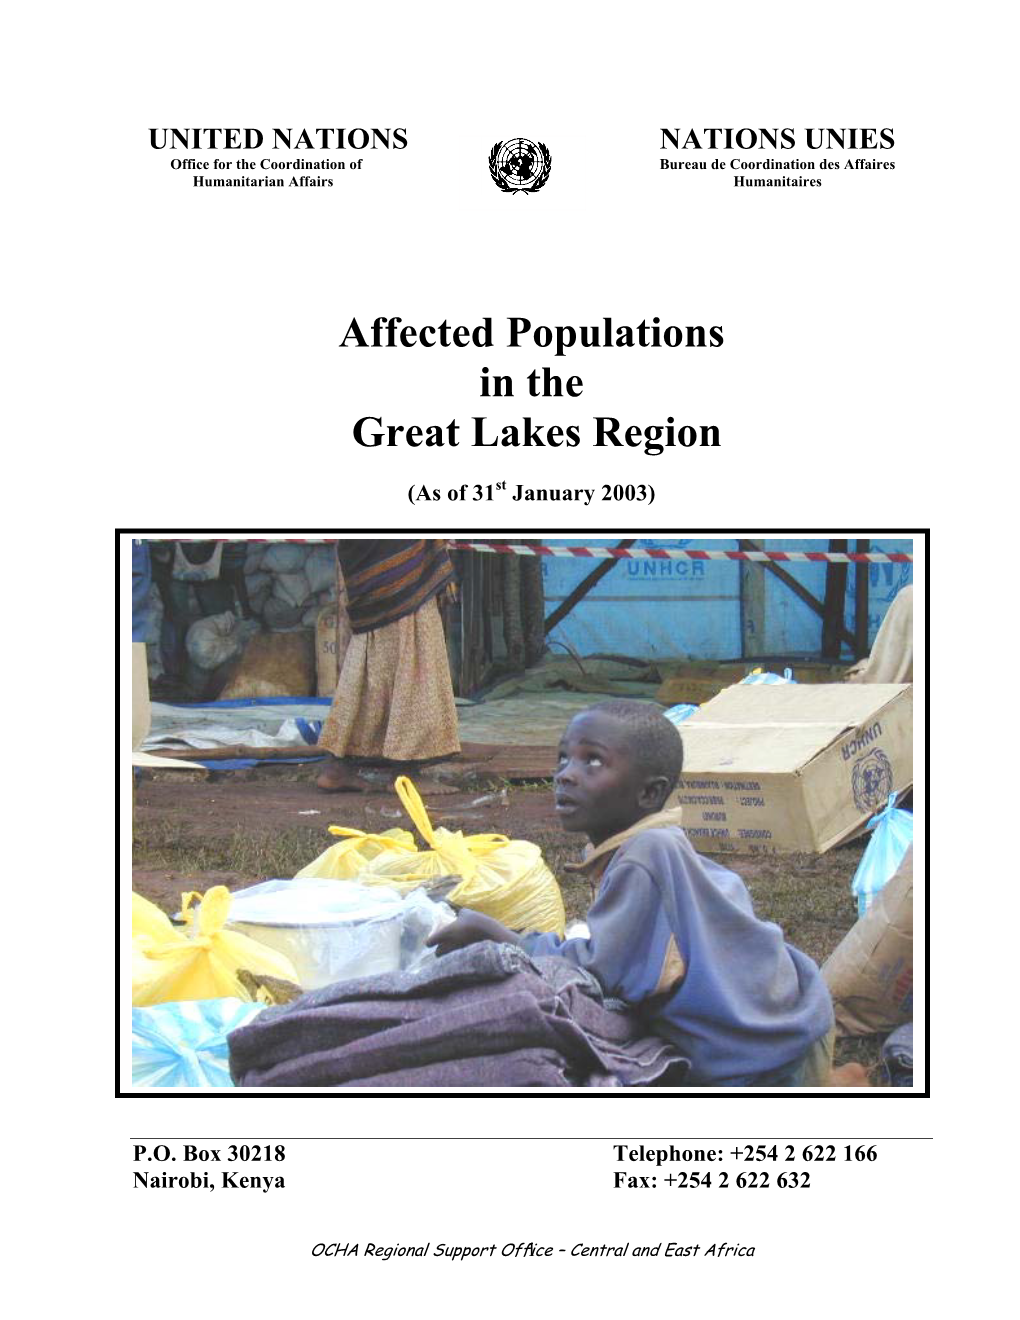 Affected Populations in the Great Lakes Region